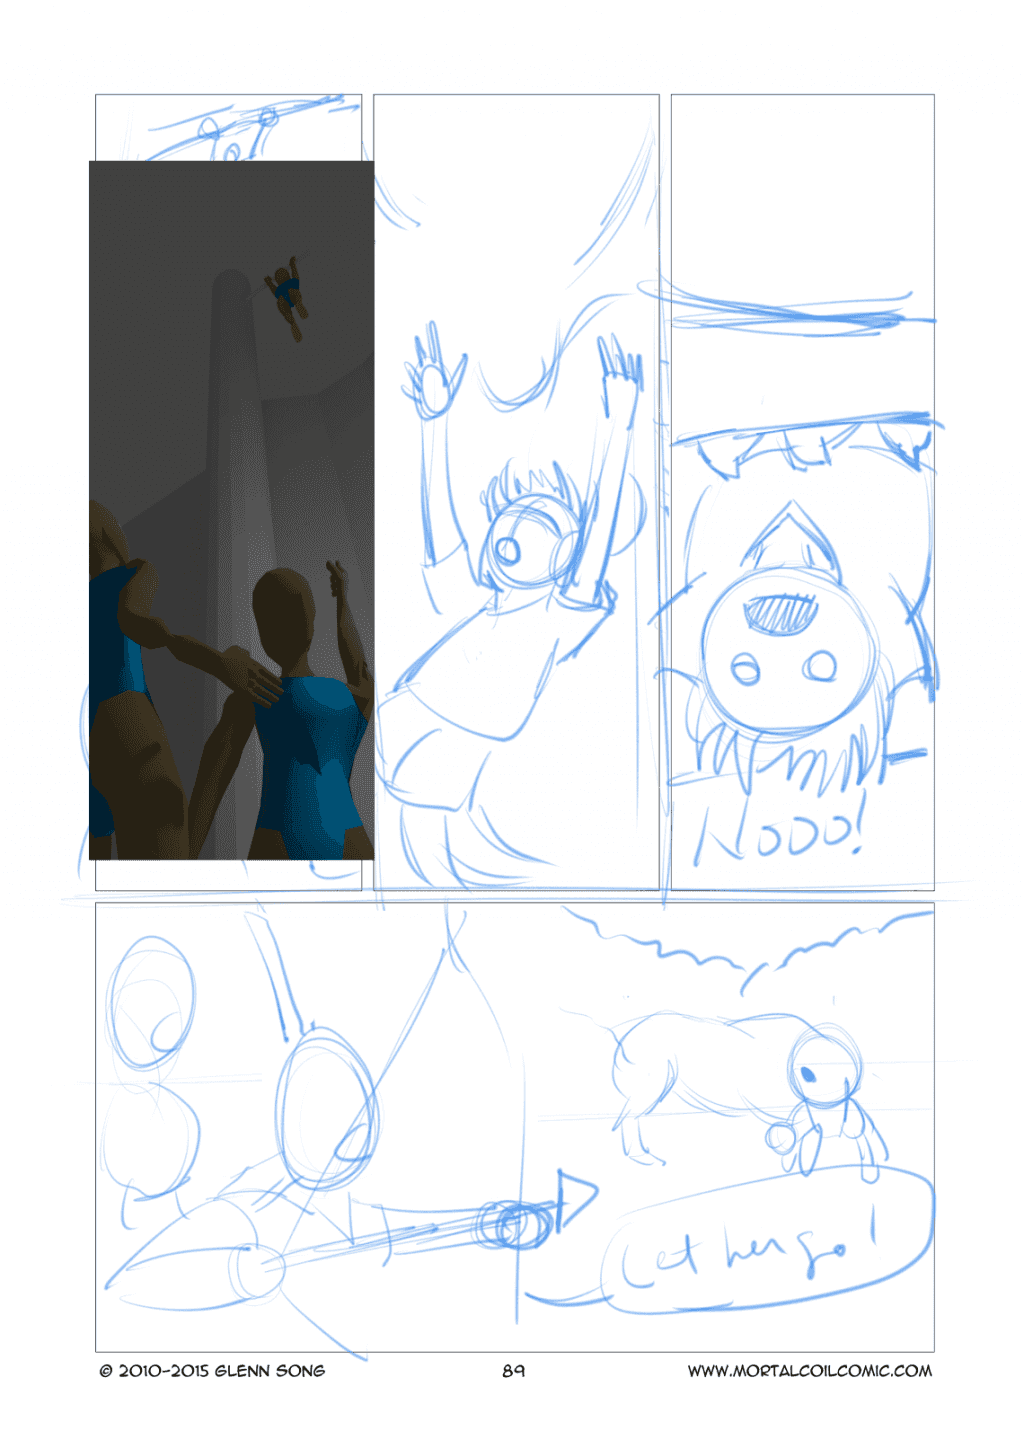 A Voice in the Woods - 6 Storyboard